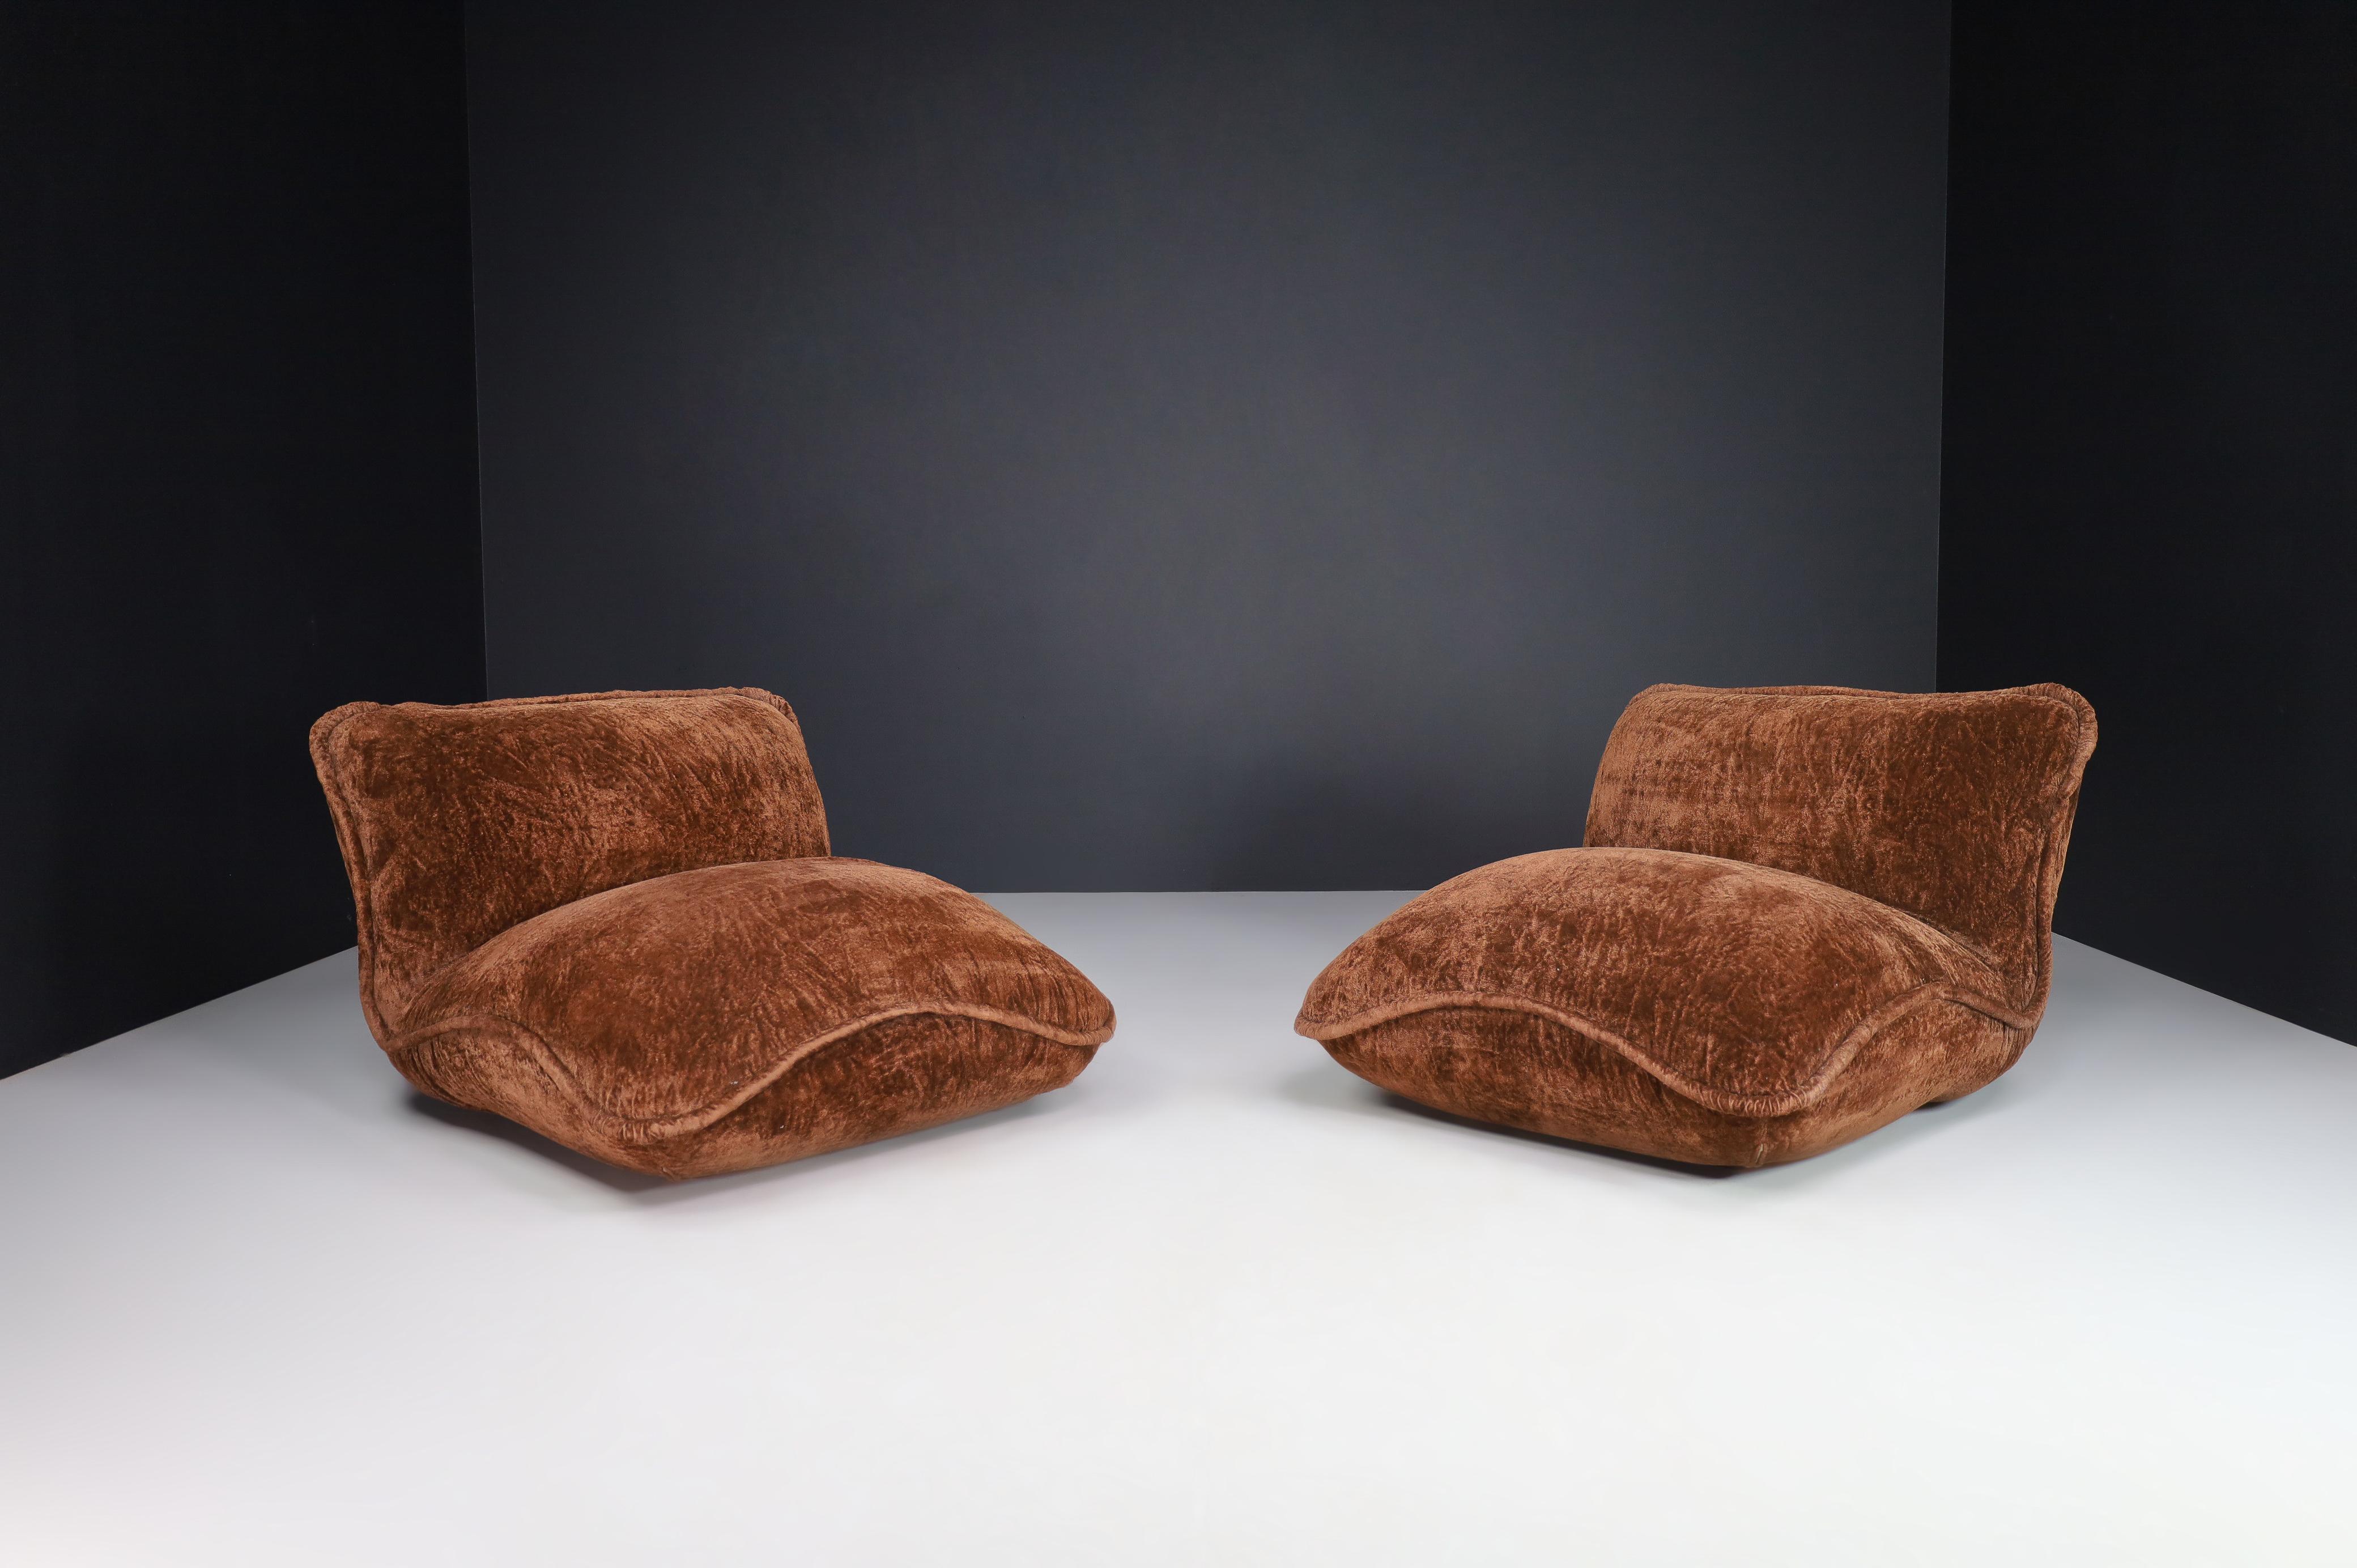 Set of 2 Gena Lounge chairs by Claudio Vagnoni for 1P Italy, 1969

Stunning set of model 'Gena' lounge chairs designed by Claudio Vagnoni for 1P Italy in 1969. The condition of the chairs is excellent, and they have never been separated. There are